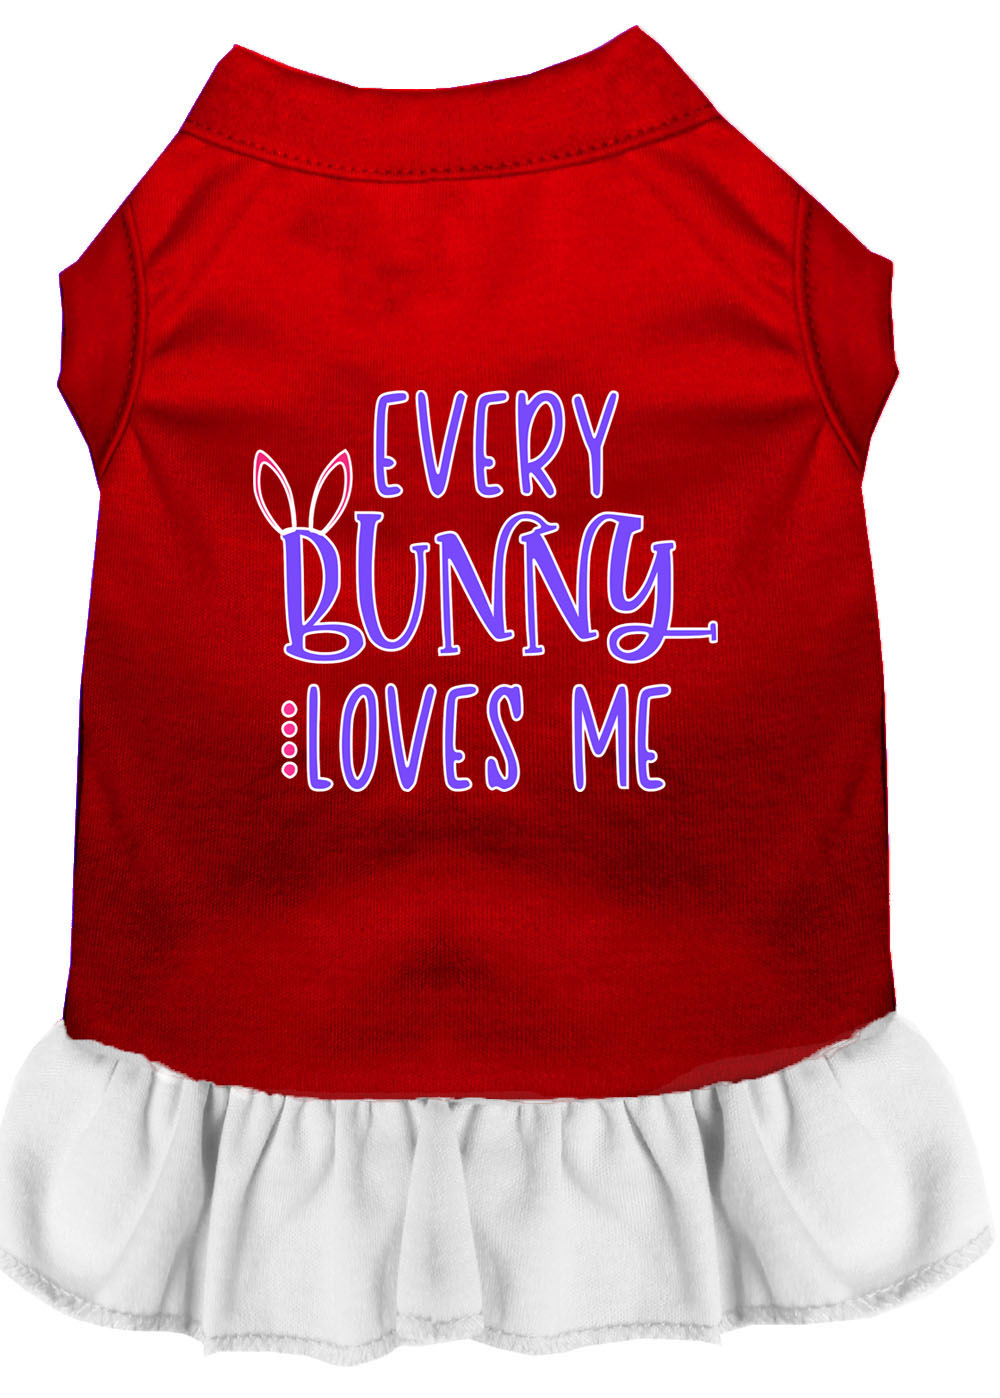 Every Bunny Loves me Screen Print Dog Dress Red with White XS